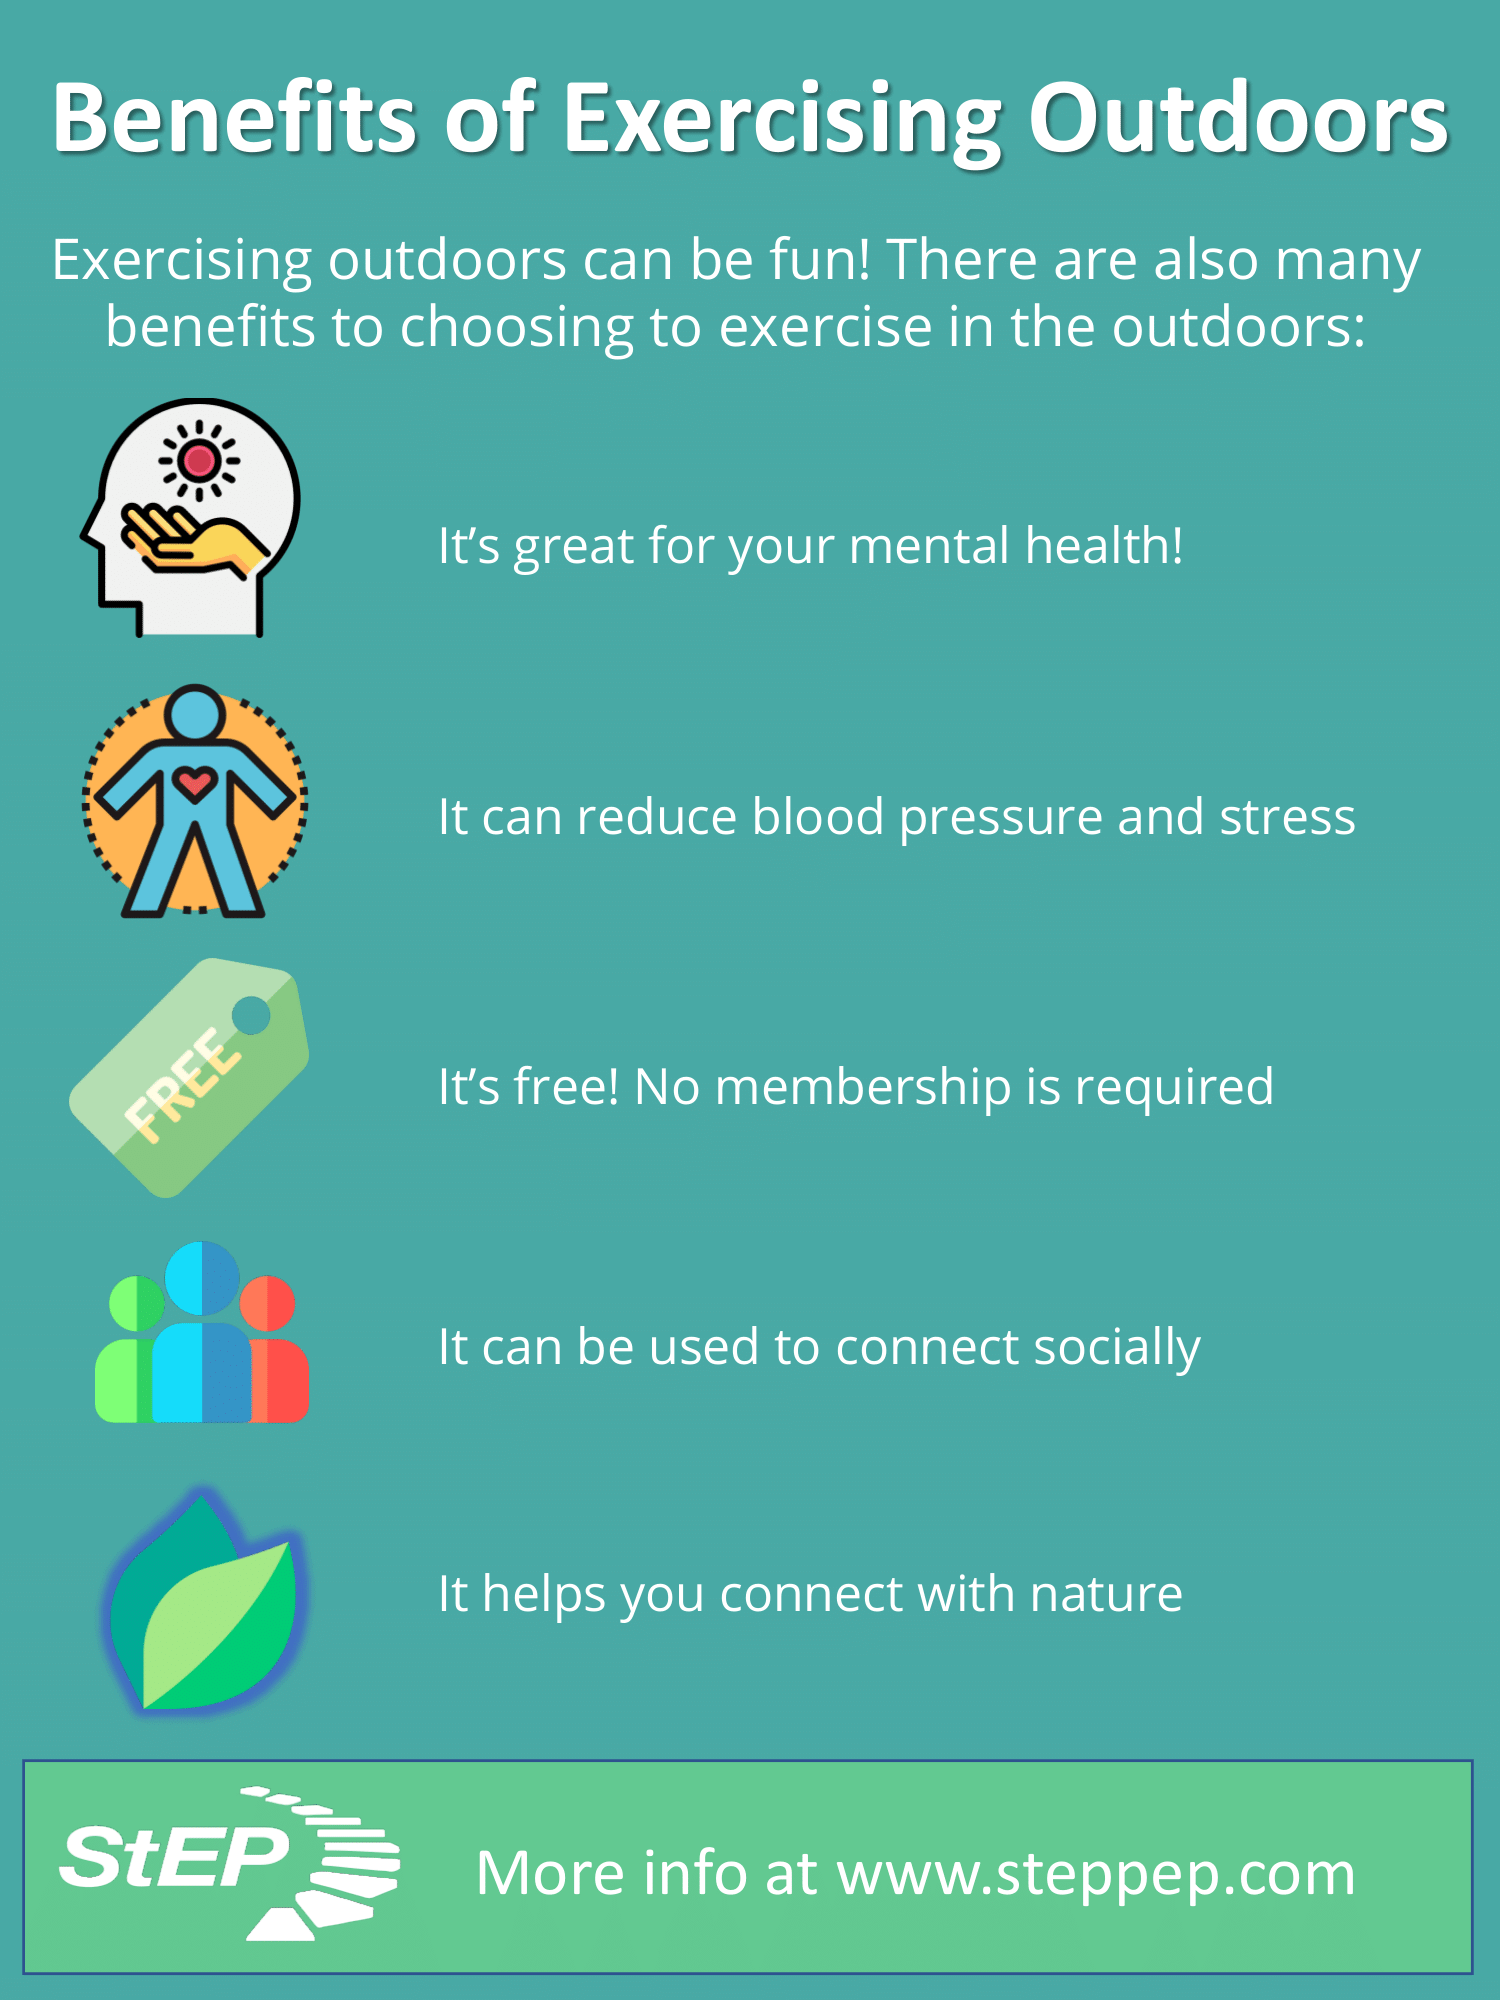 Benefits of Outdoor Exercise